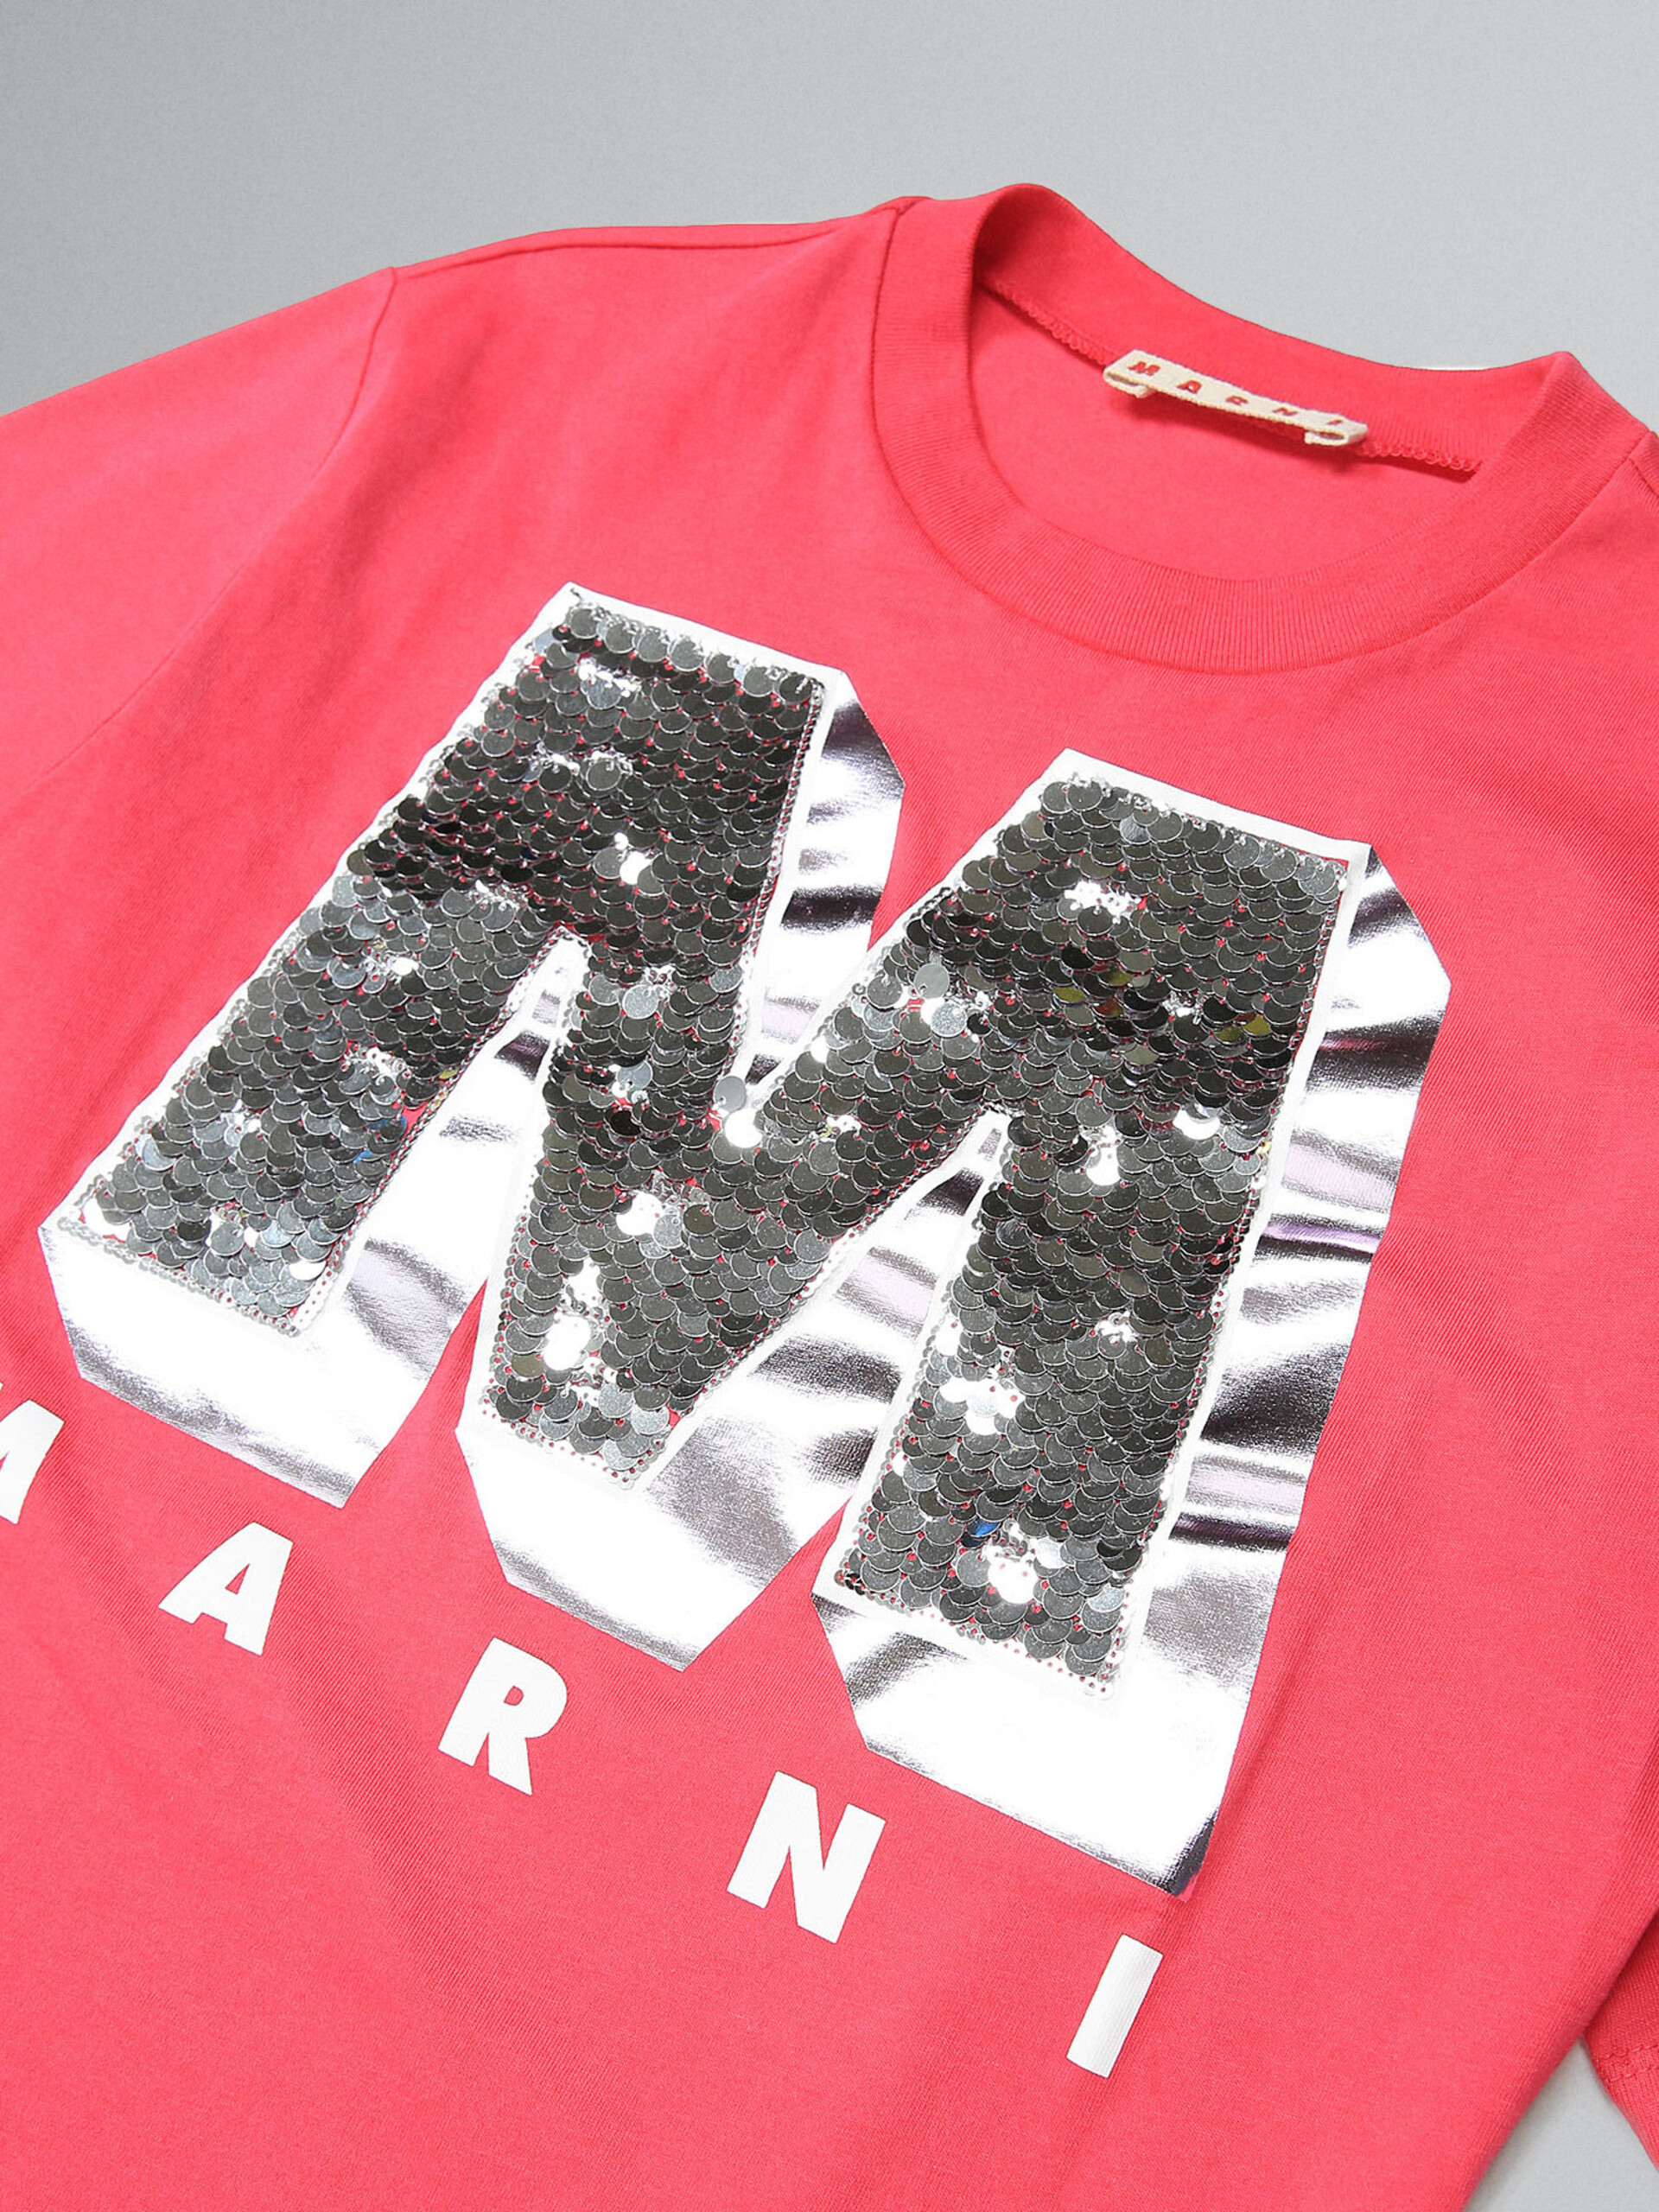 Red T-shirt with sequin "M" patch - T-shirts - Image 3